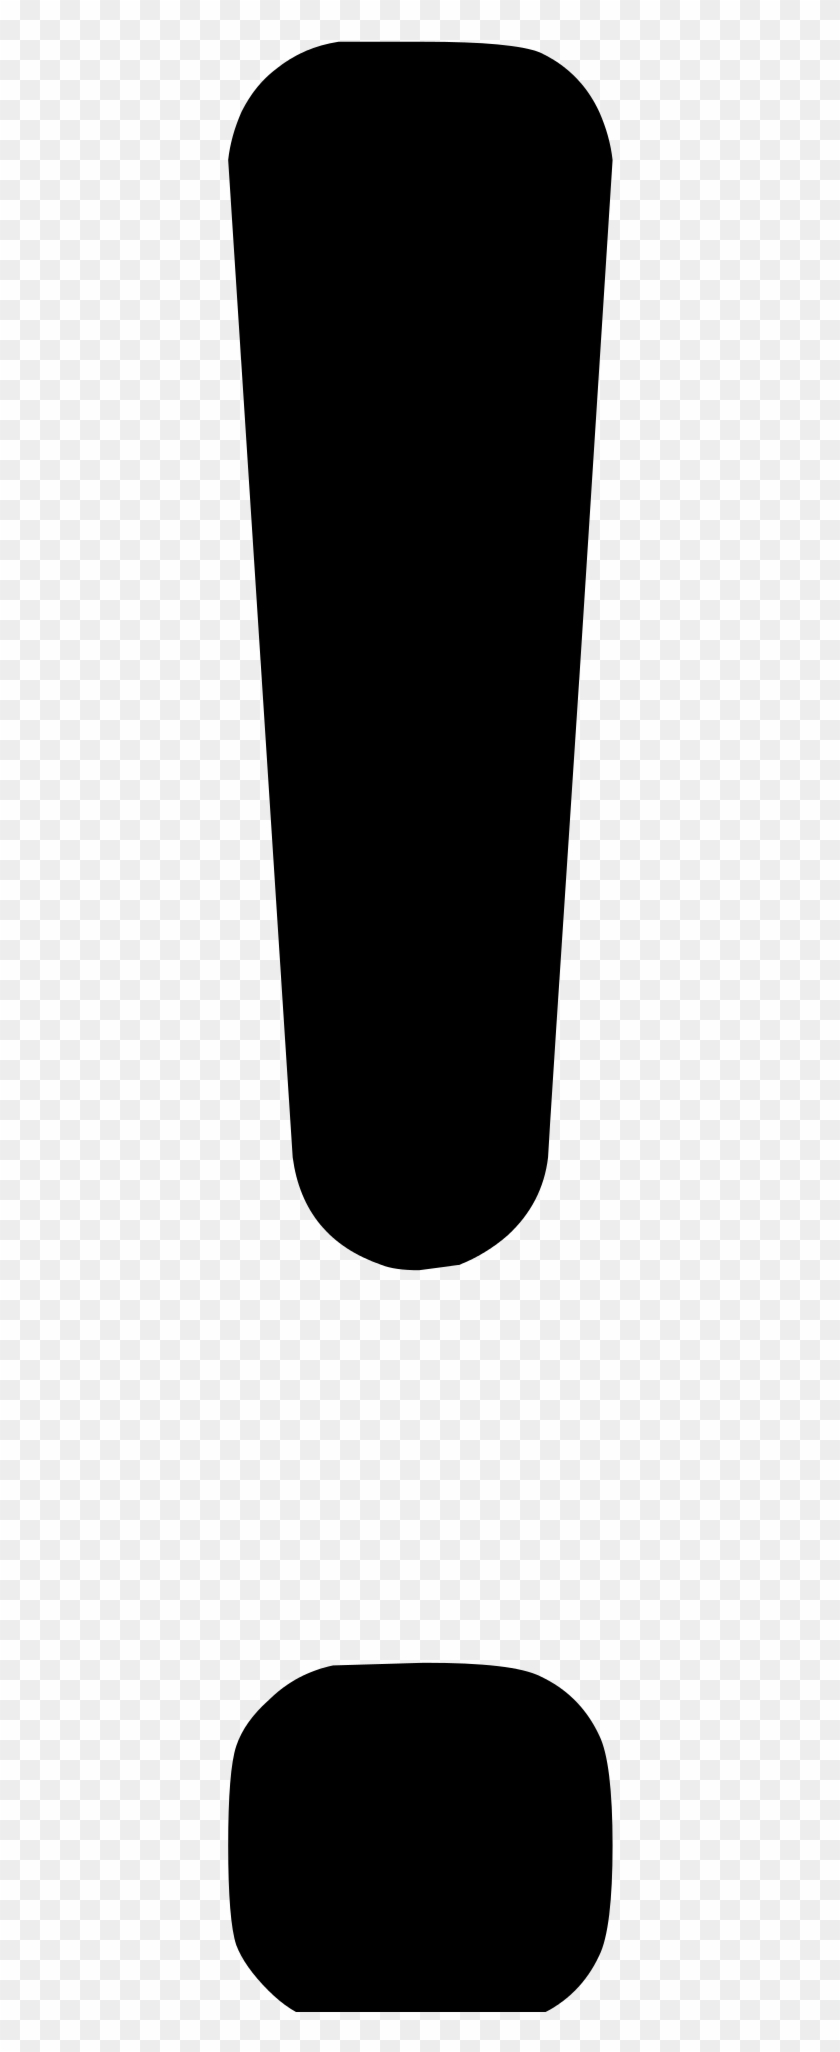 Exclamation Mark Png - Black Transparent Background Exclamation Point Clipart